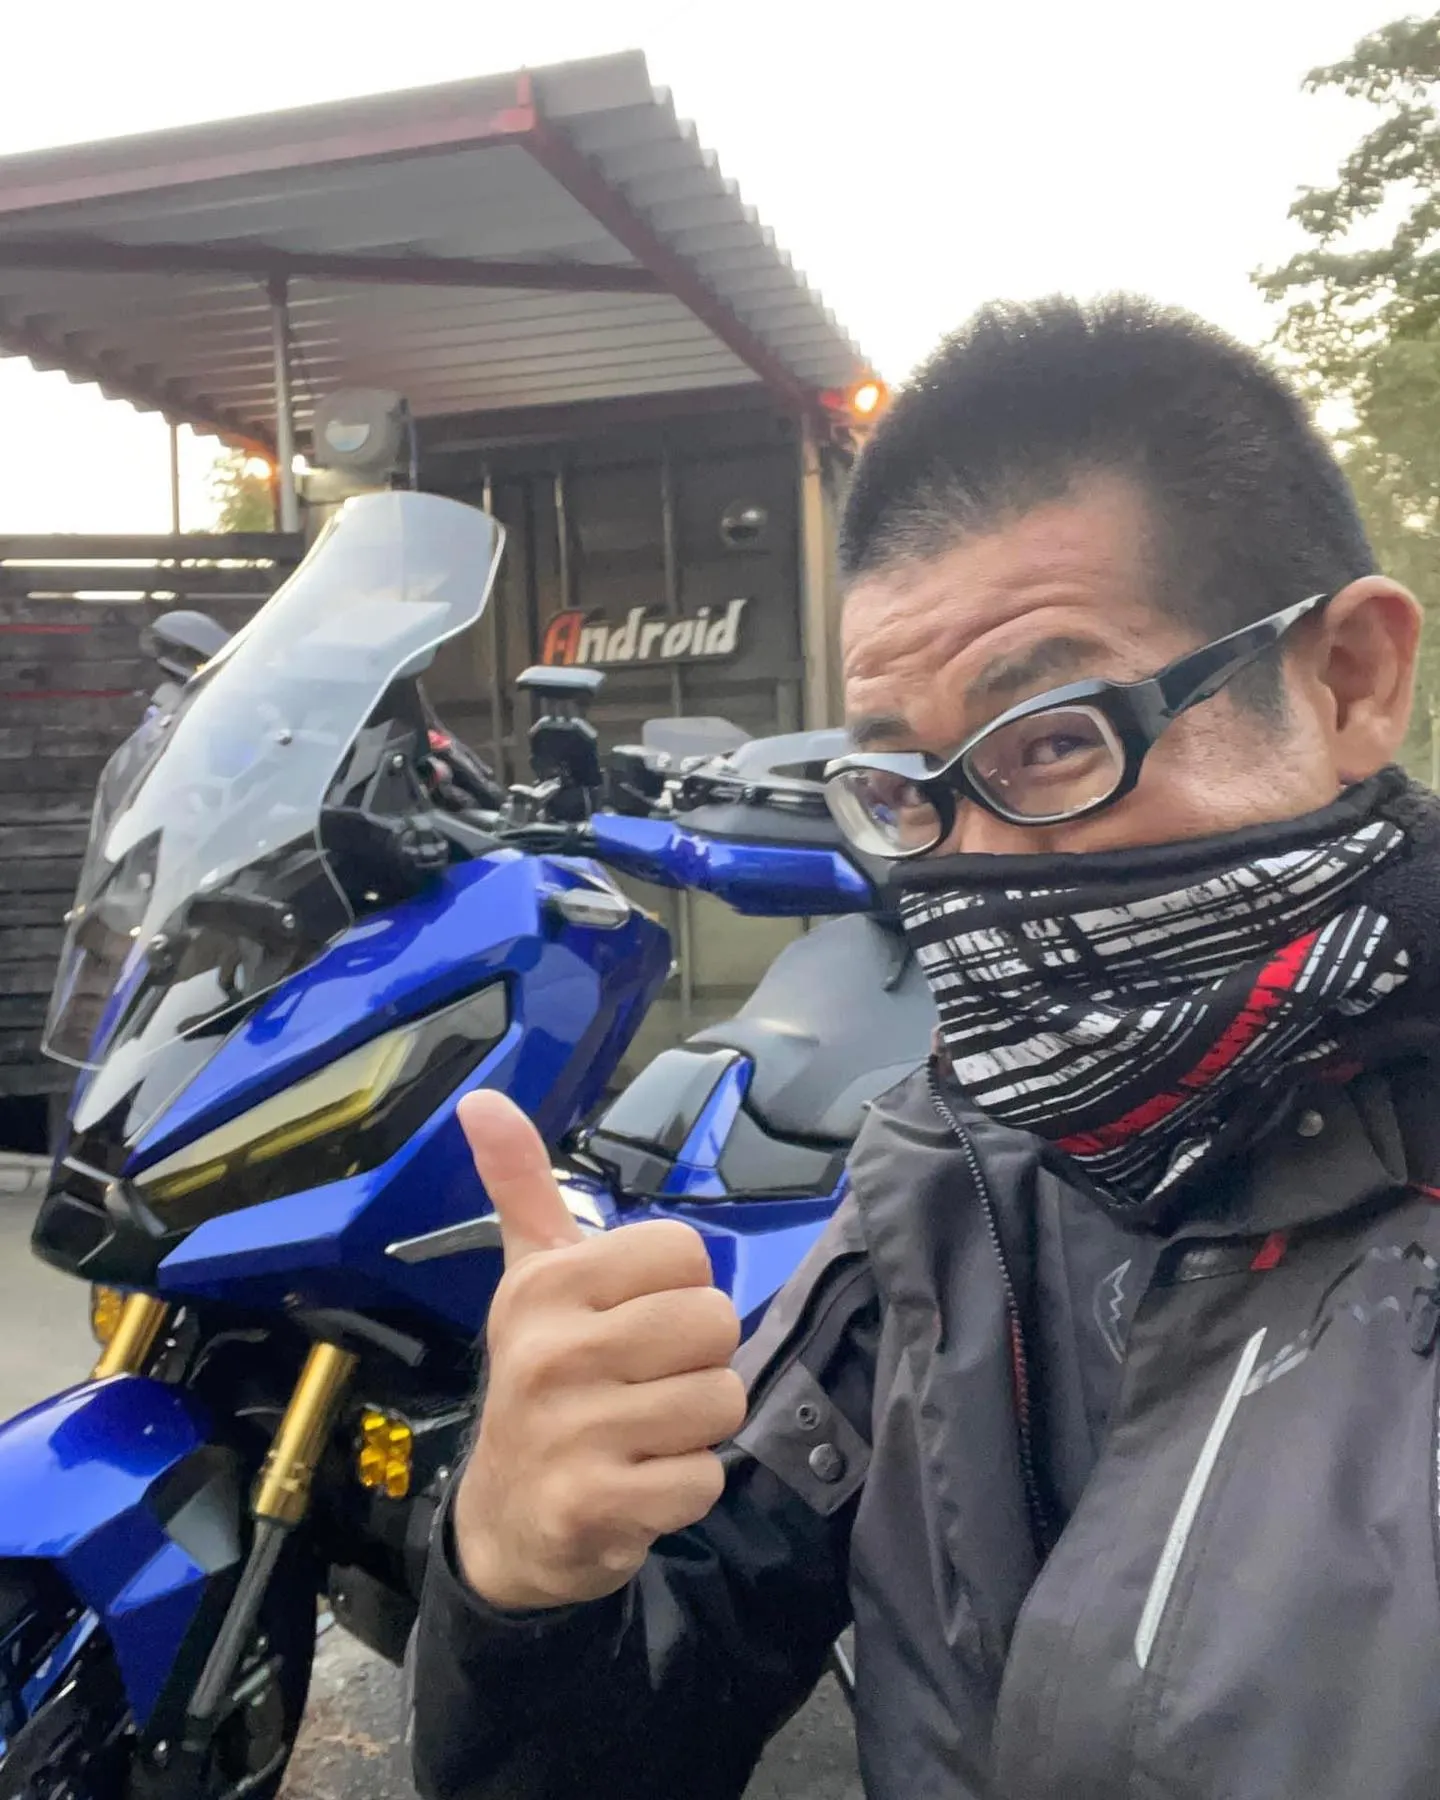 Android motor cycleの社長様より嬉しい報告...